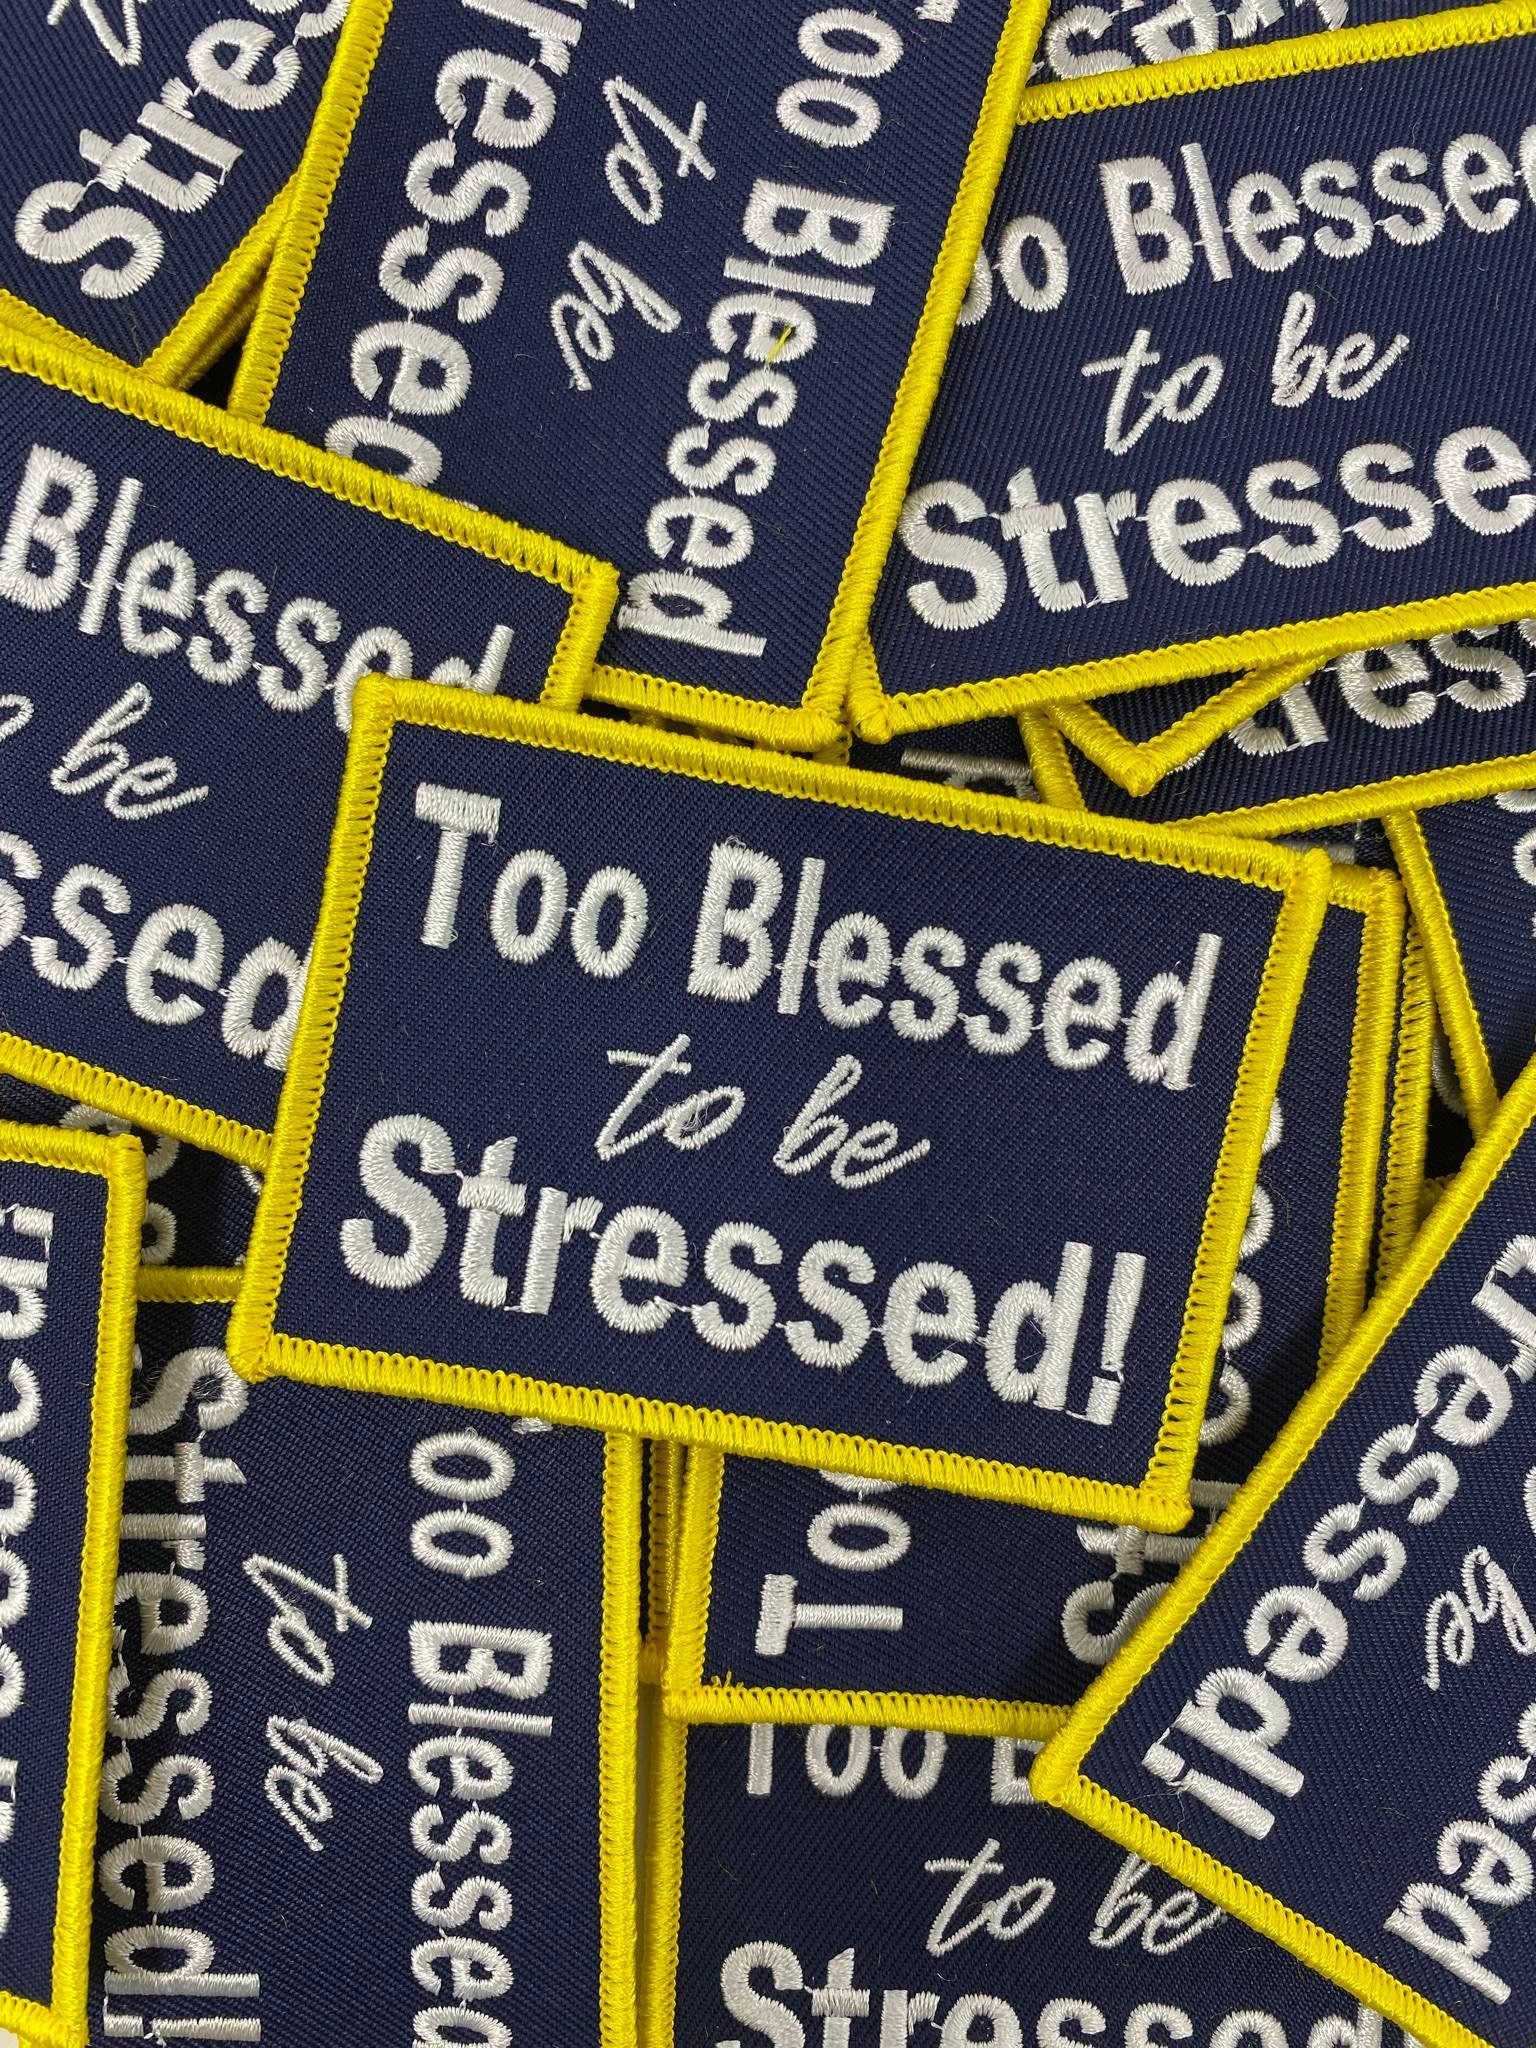 NEW, 1-pc Navy Blue & Yellow, "Too Blessed to Be Stressed" Iron-on Embroidered Patch, Cool Patch for Clothing and Accessories; Size 3", DIY